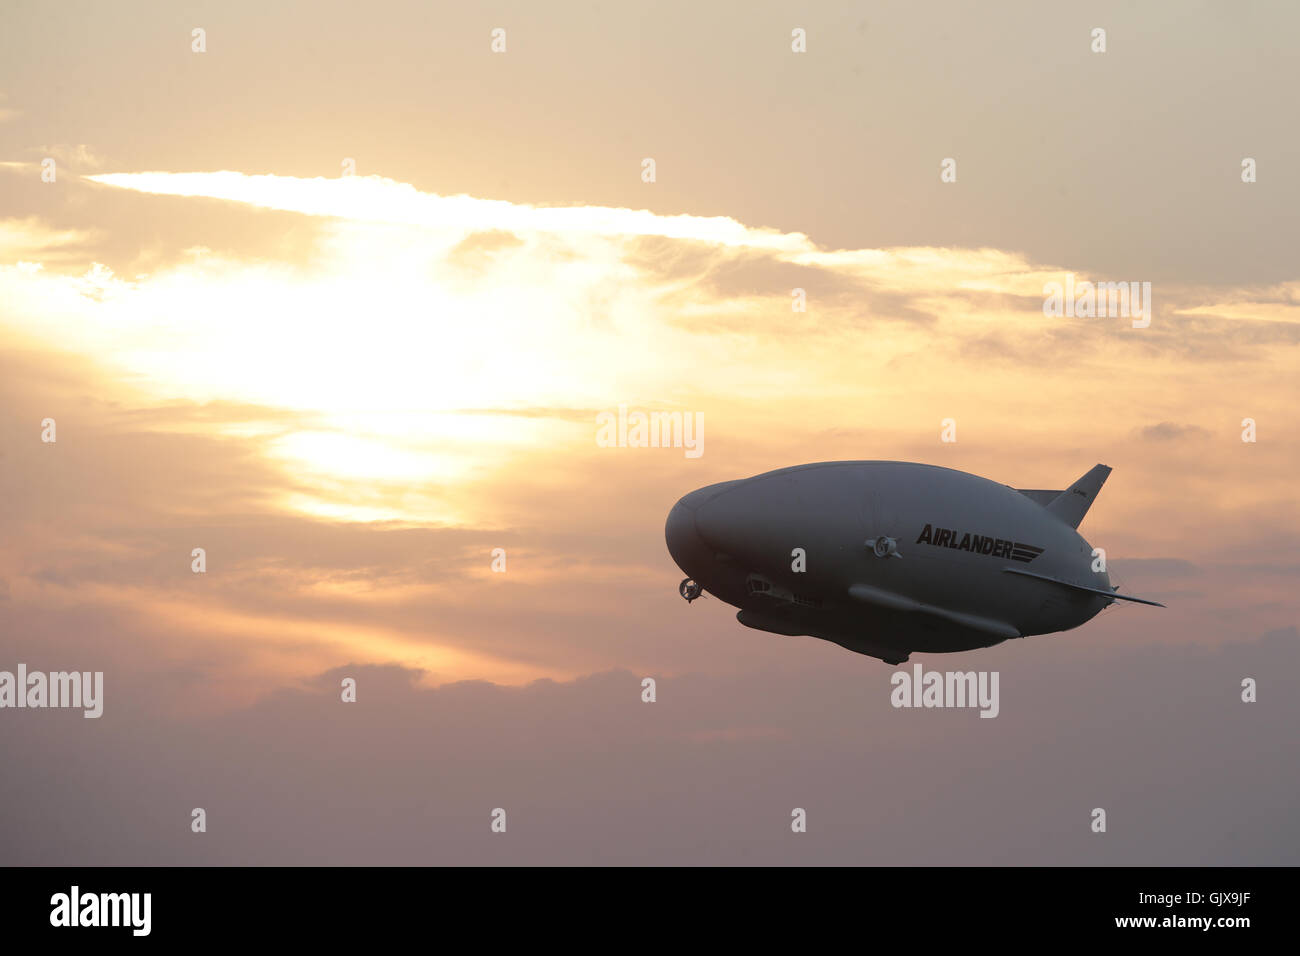 The Airlander 10, the largest aircraft in the world, during its maiden flight at Cardington airfield in Bedfordshire. Stock Photo